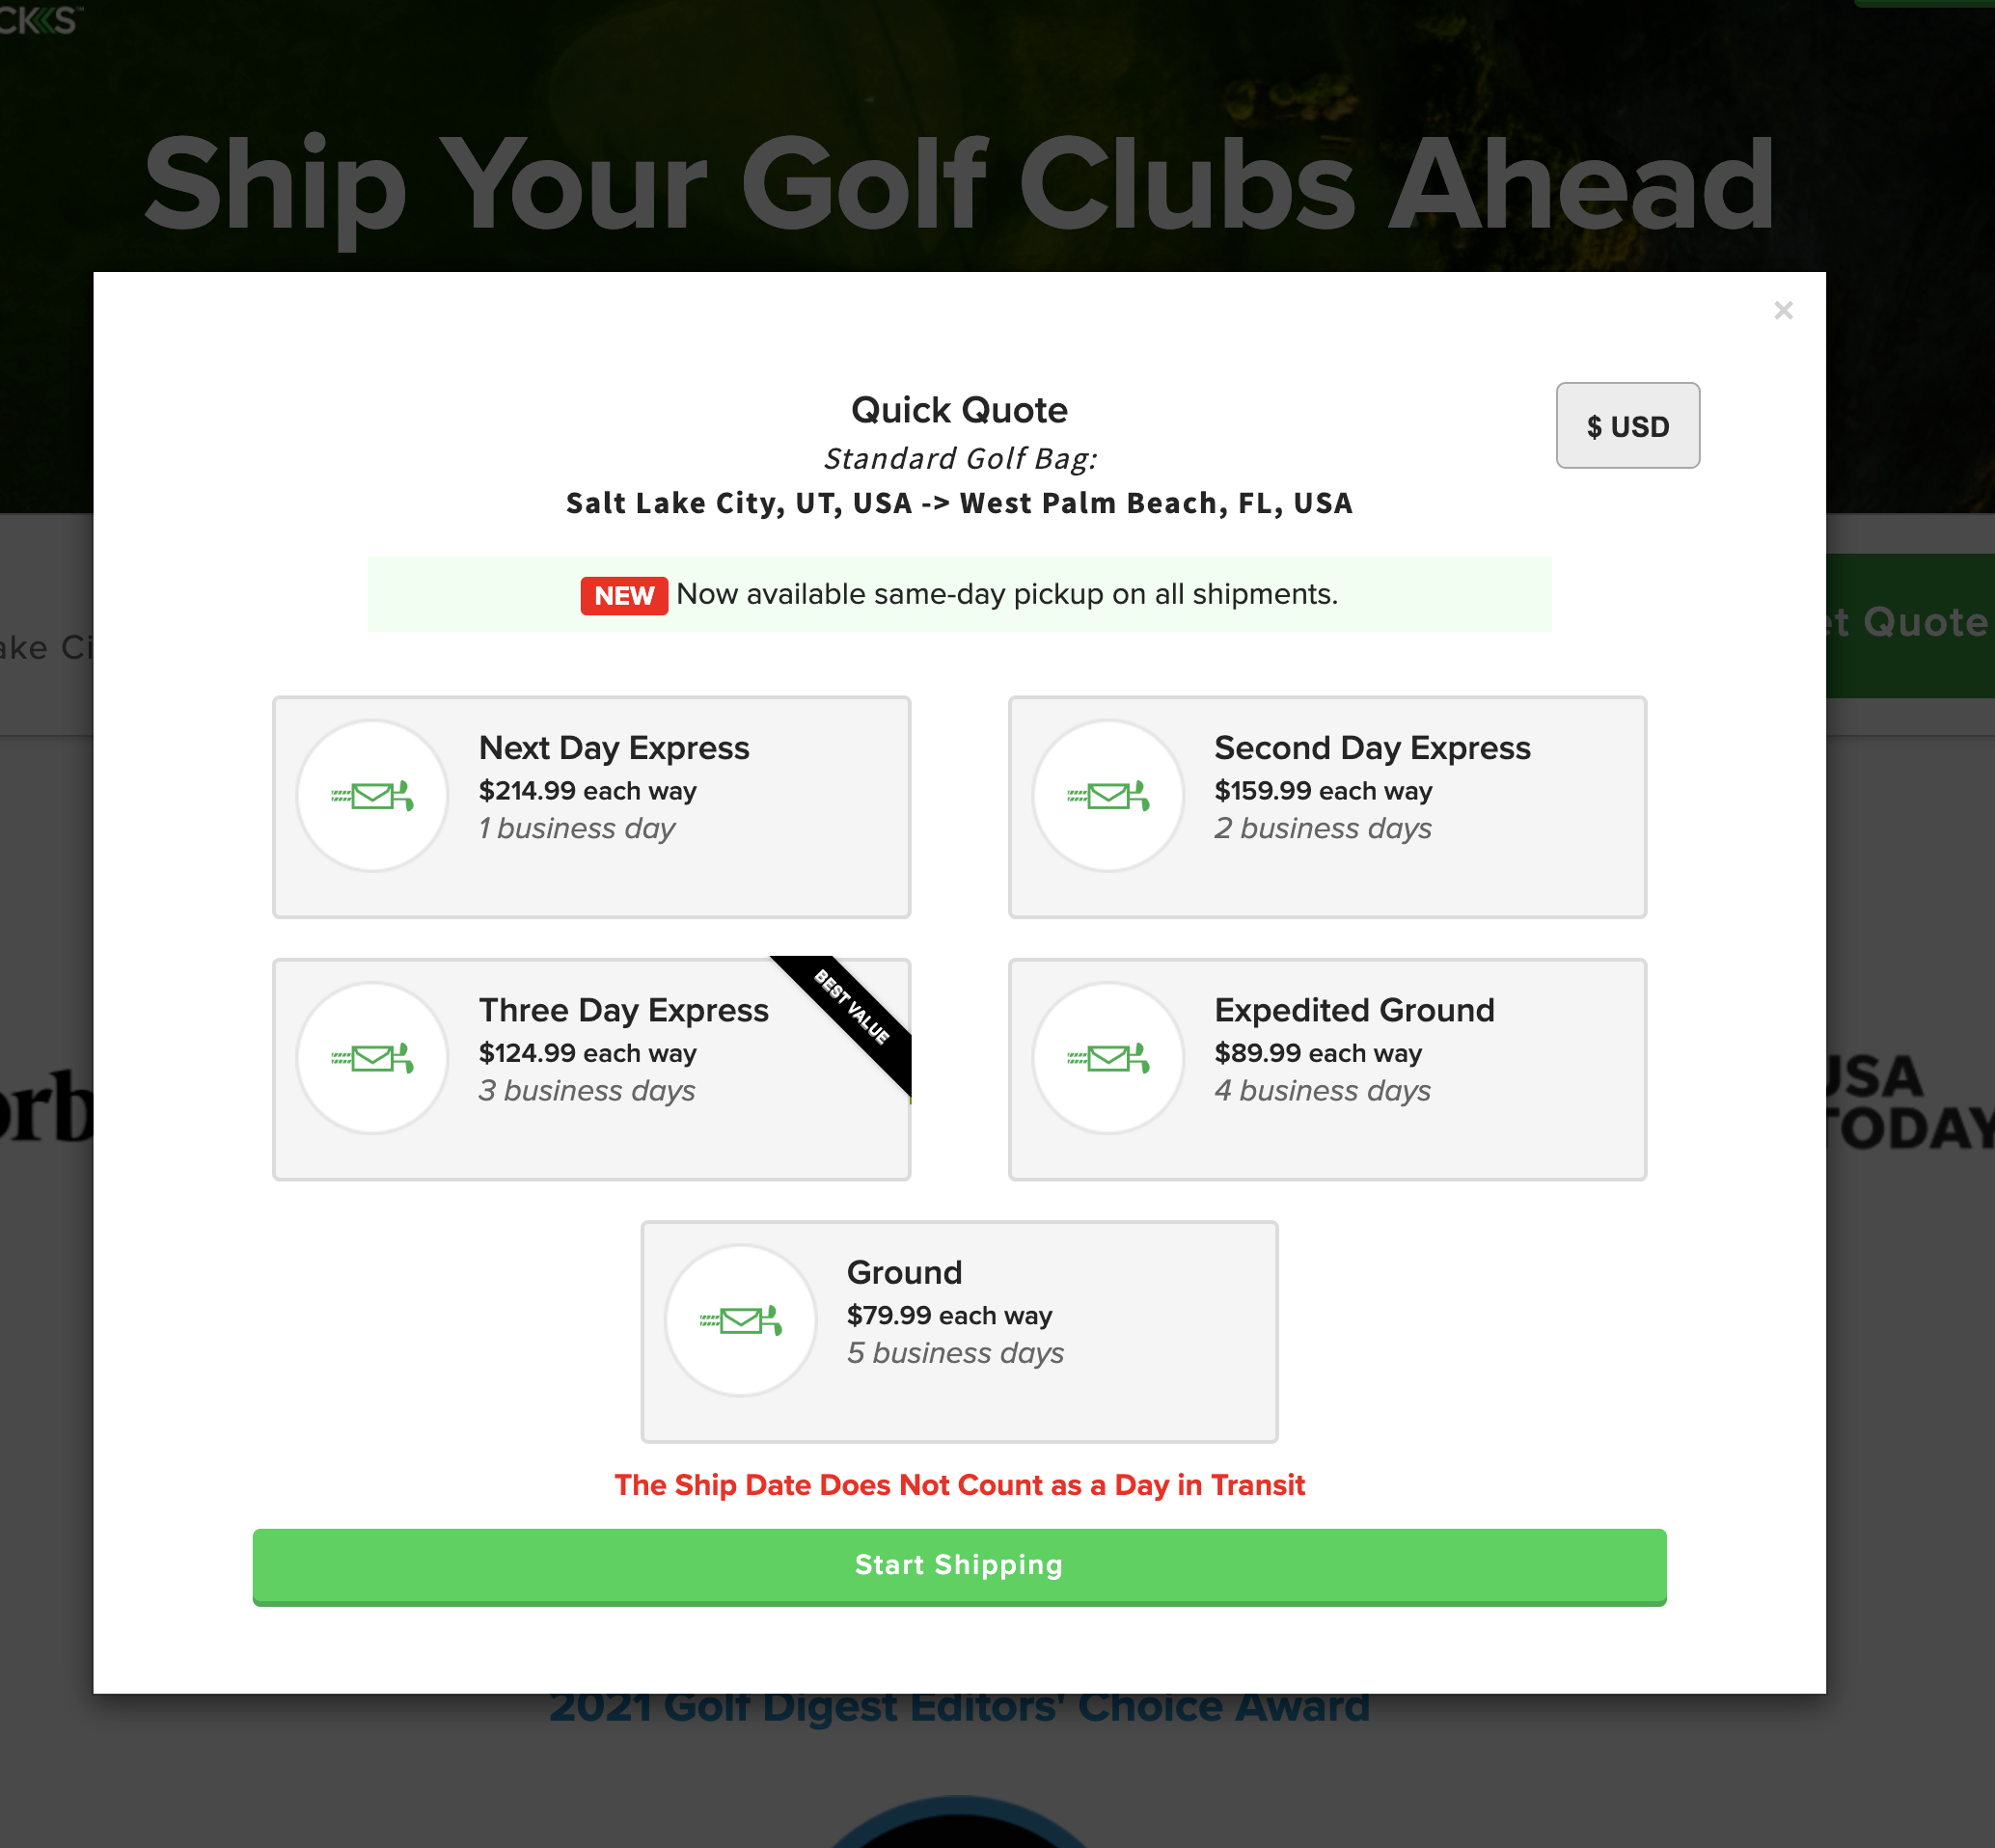 Shipsticks quote interface